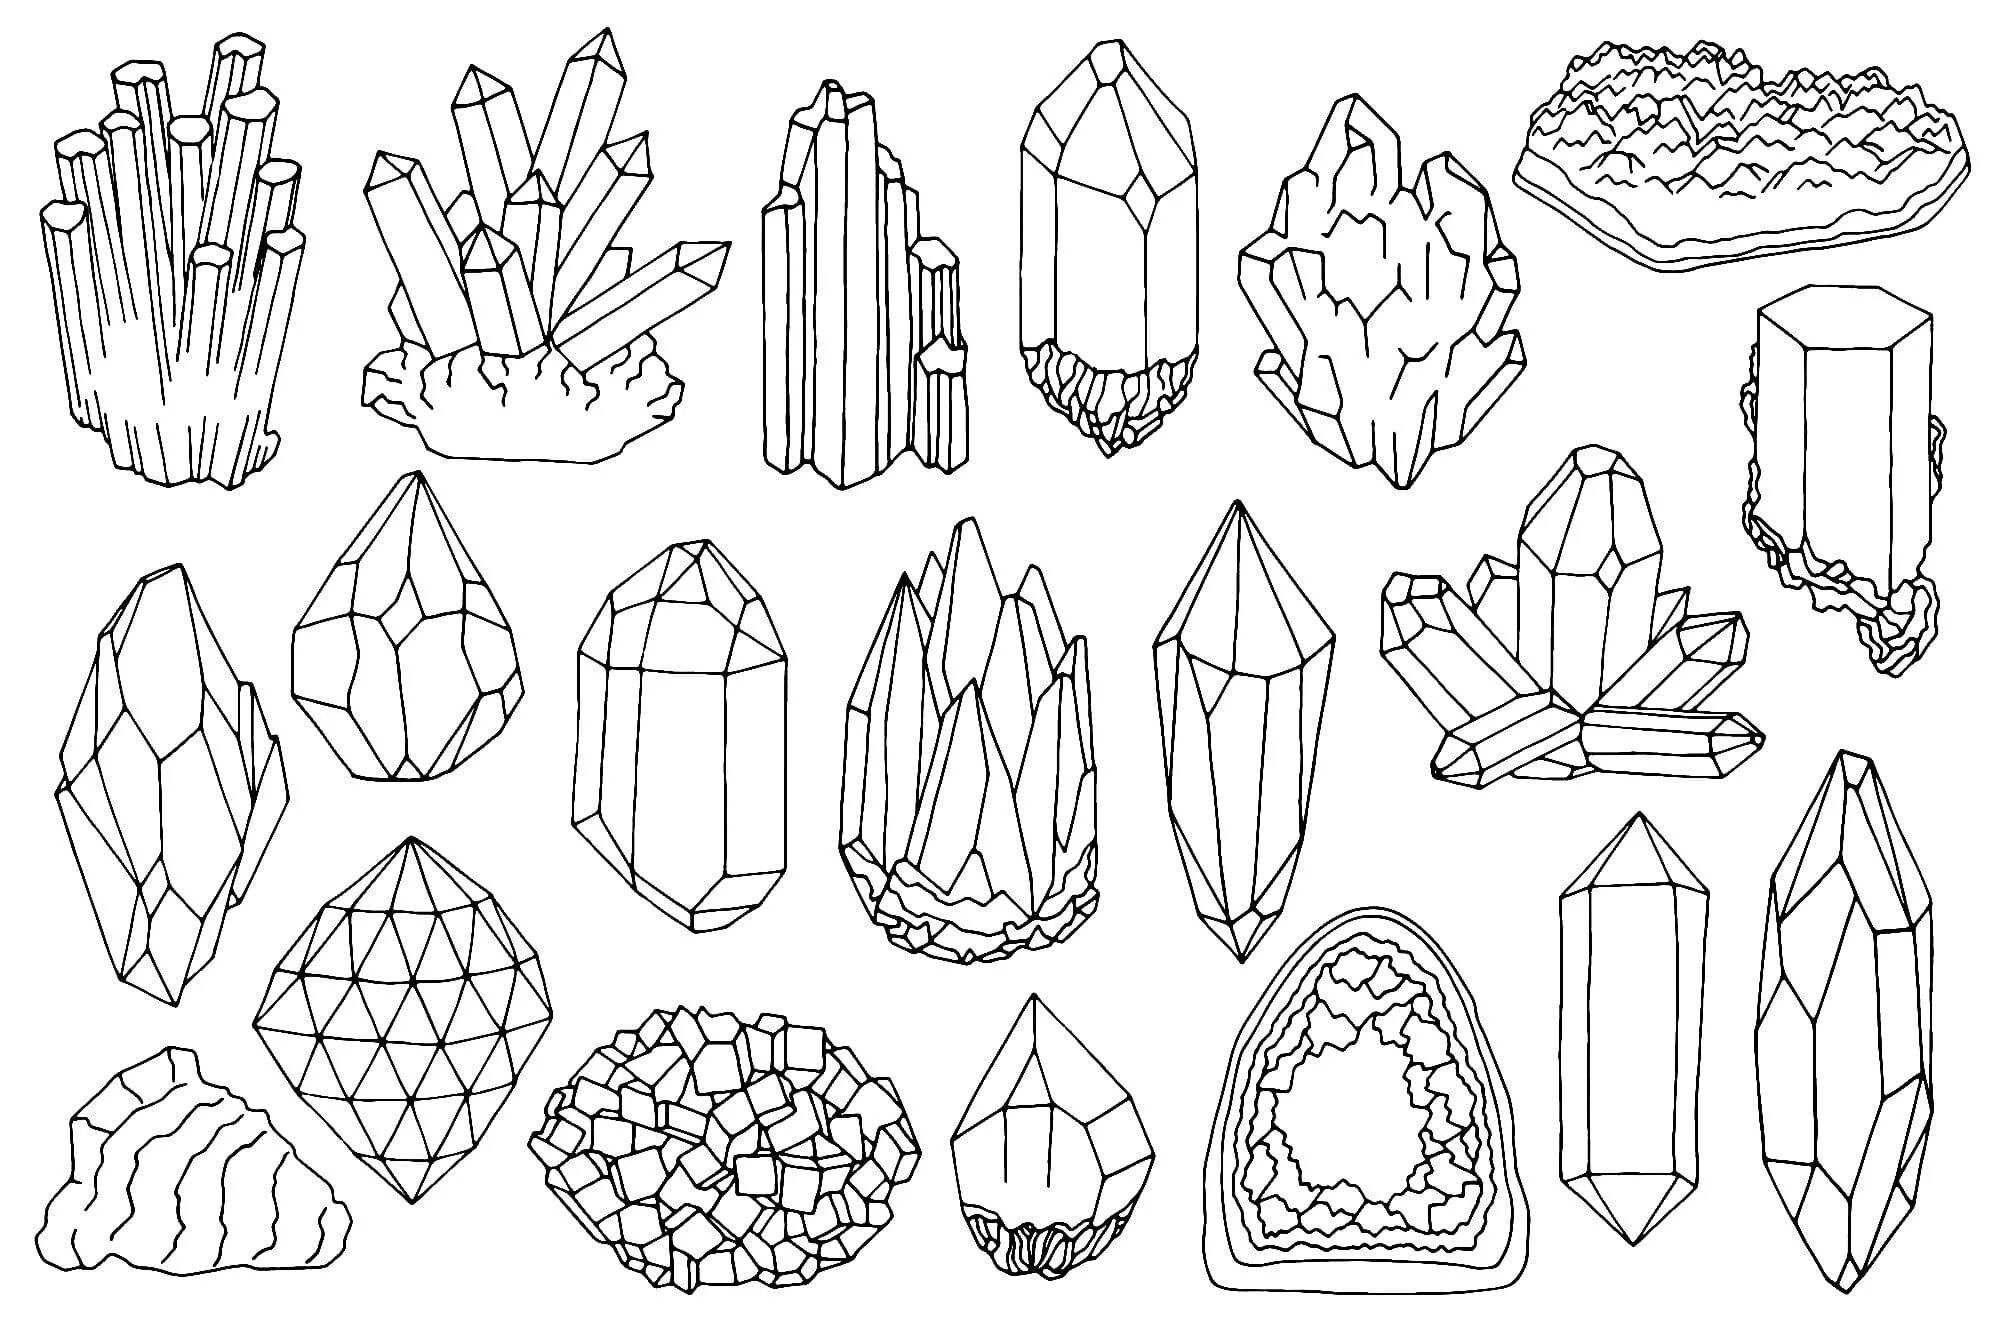 Coloring dreamy crystals for kids